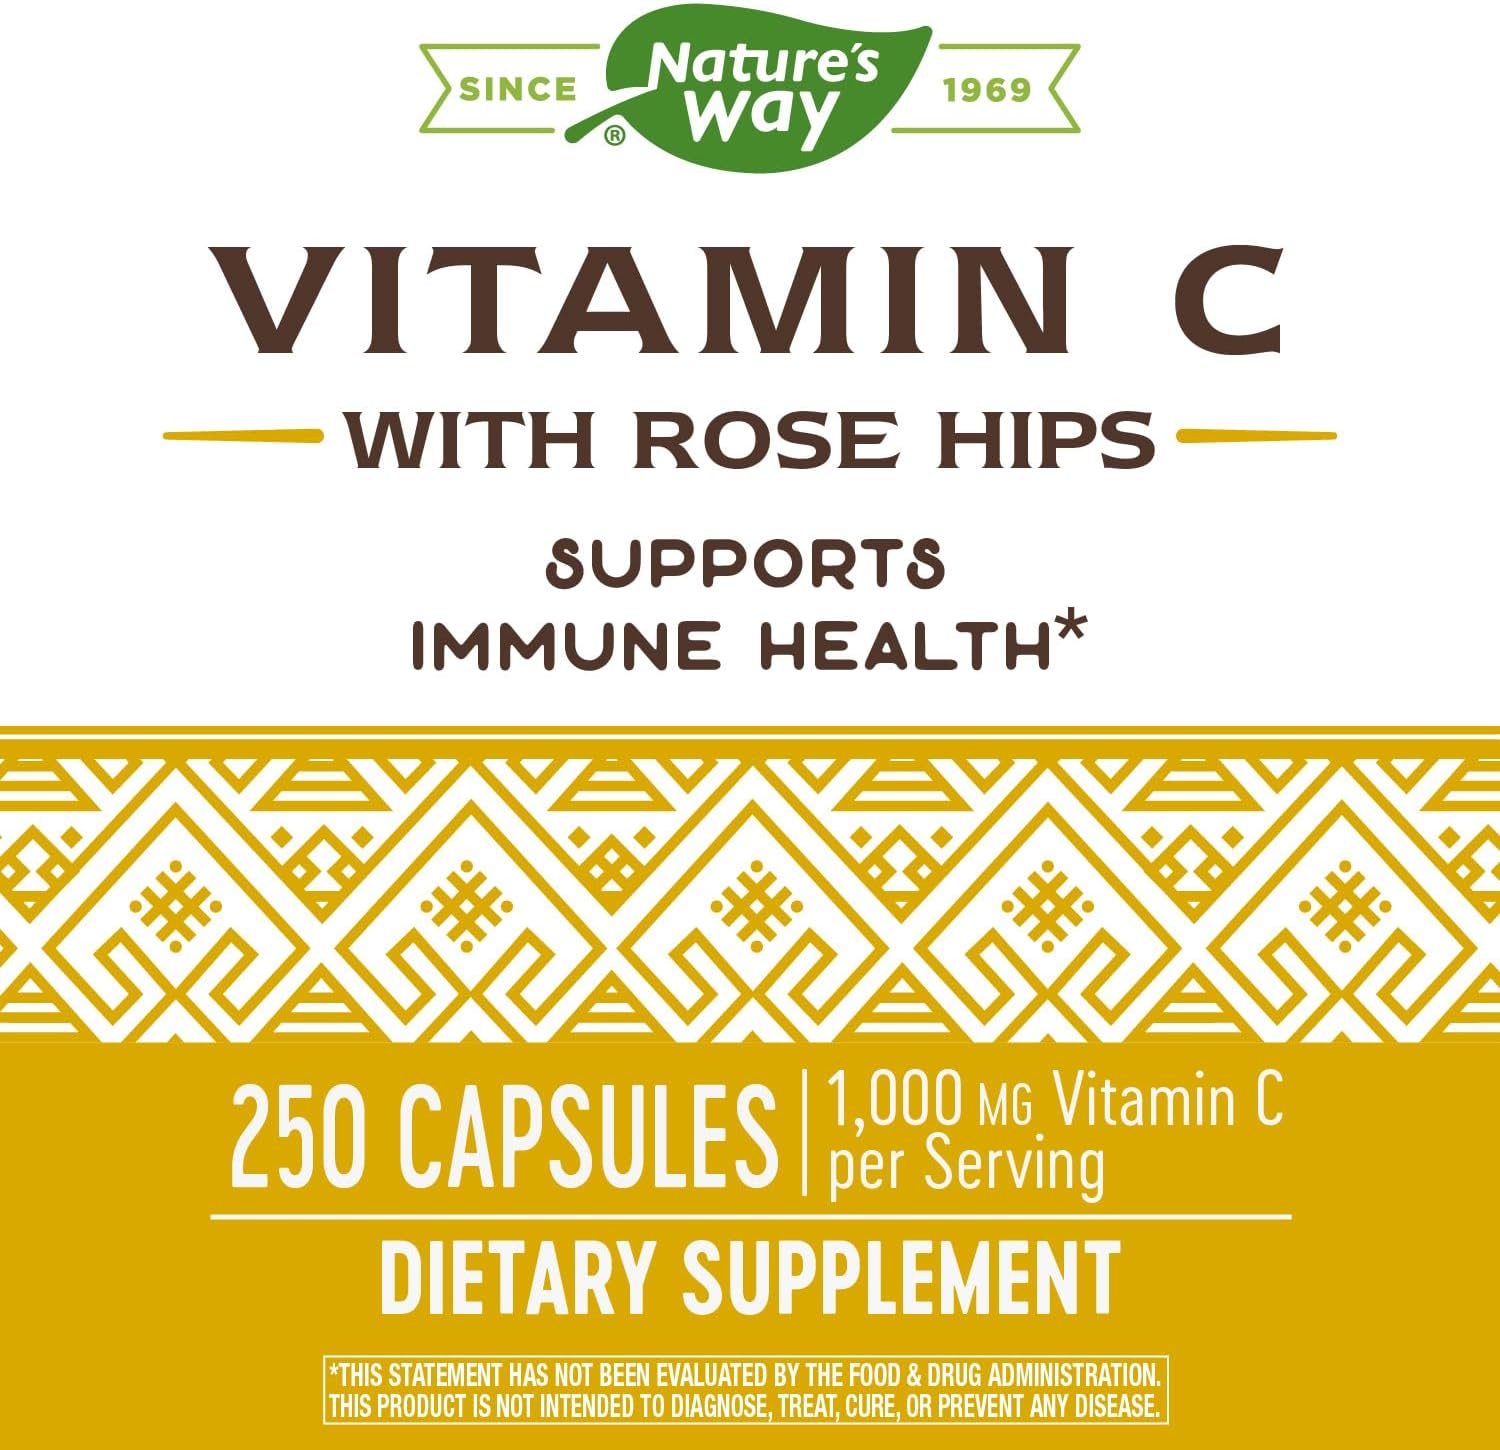 Nature's Way Vitamin C with Rose Hips - Powerful Antioxidant Protection* - Supports Immune Function* - Strengthens Collagen for Healthy Skin* - Gluten Free - 250 Capsules : Health & Household